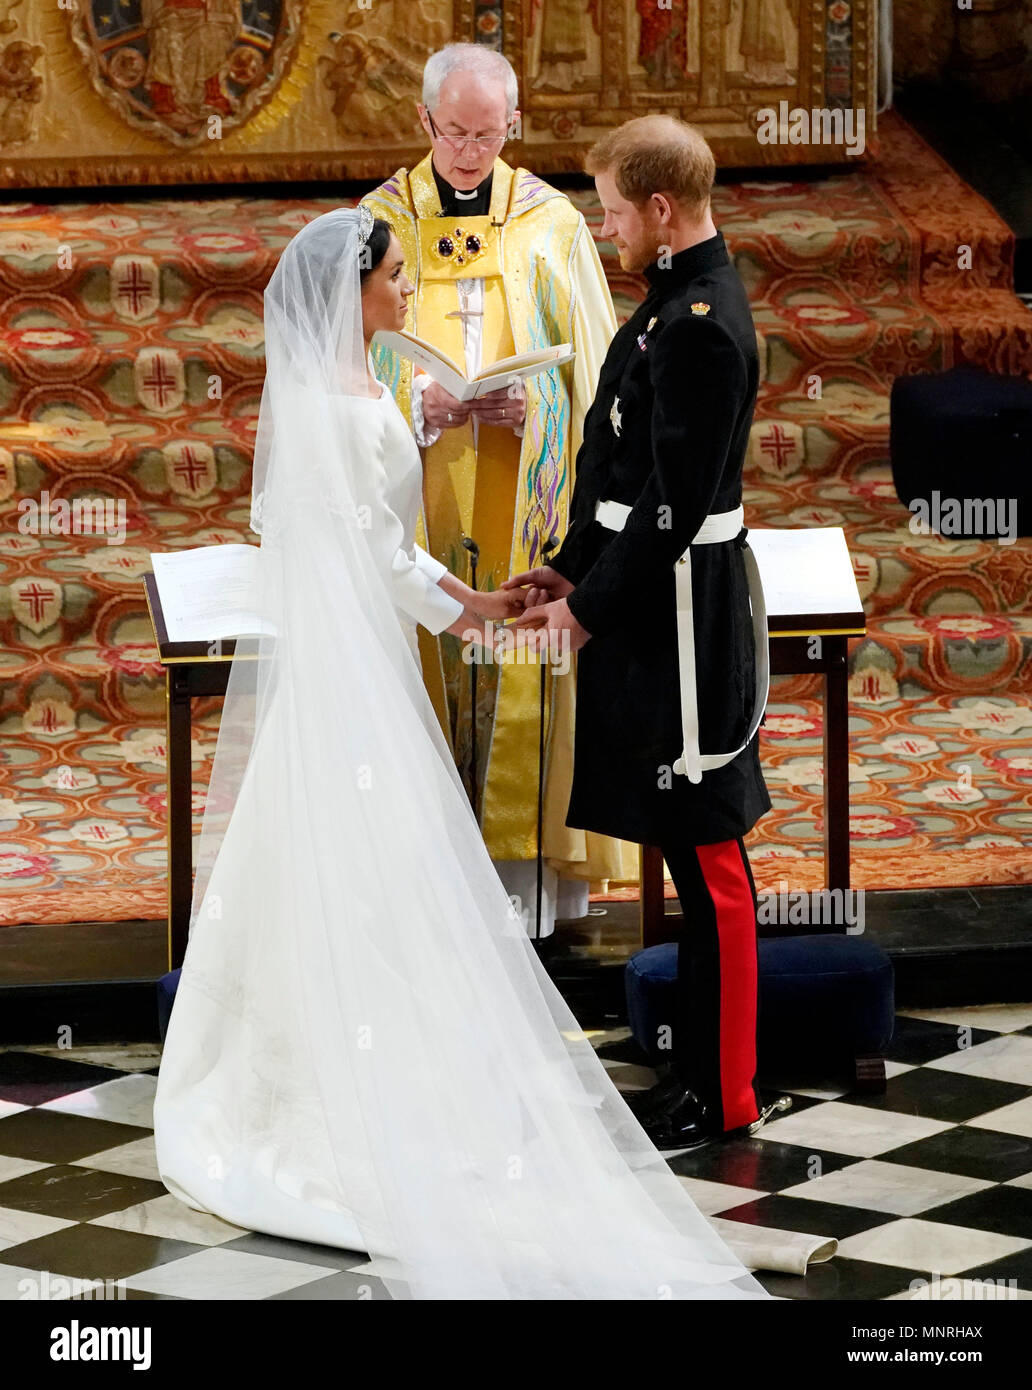 Prince Harry and Meghan Markle exchange vows in St George's Chapel at Windsor Castle during their wedding service, conducted by the Archbishop of Canterbury Justin Welby. Stock Photo